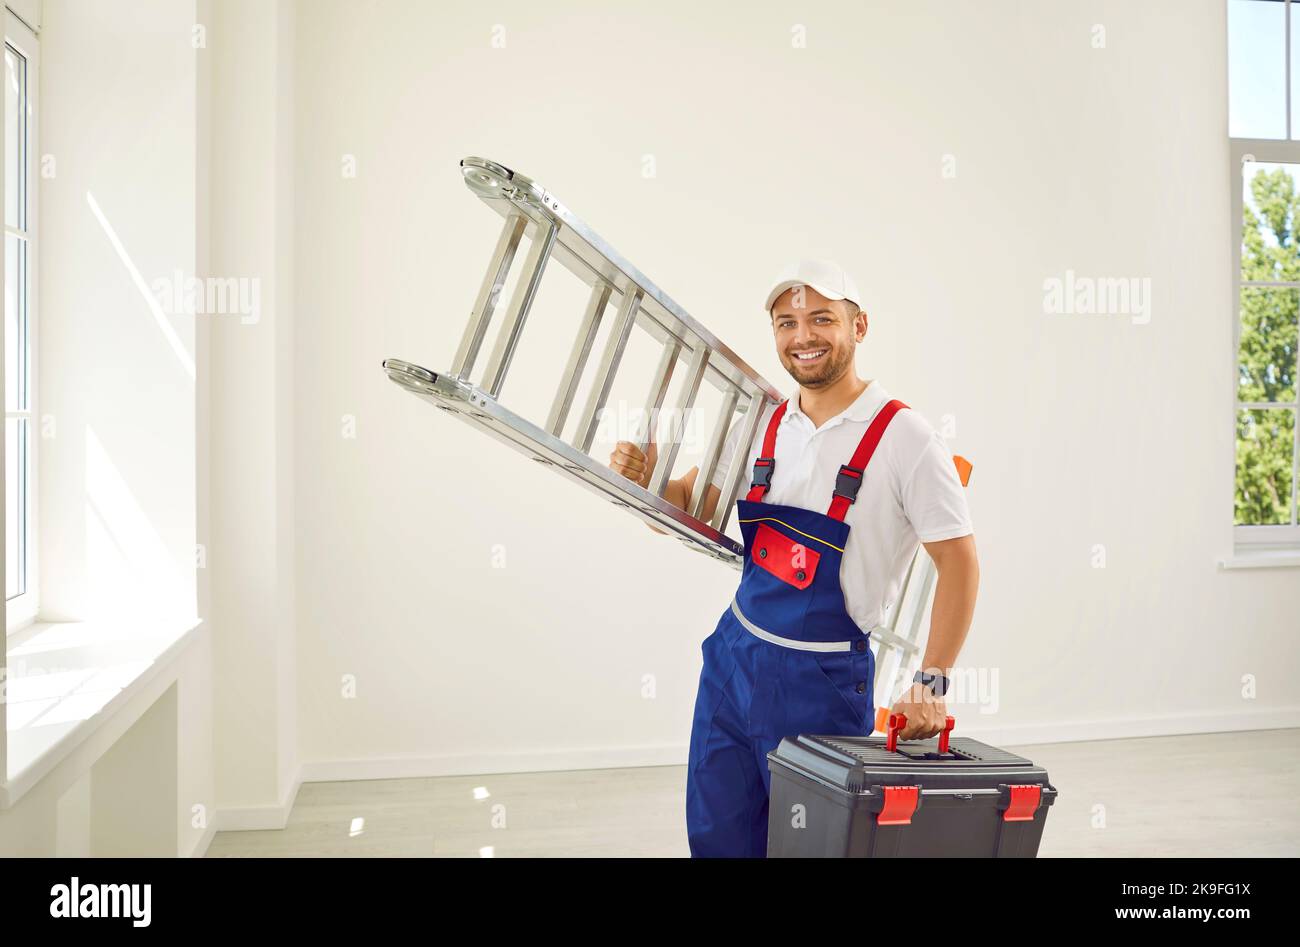 Happy repairman standing in the room, holding a ladder and a toolbox and smiling Stock Photo